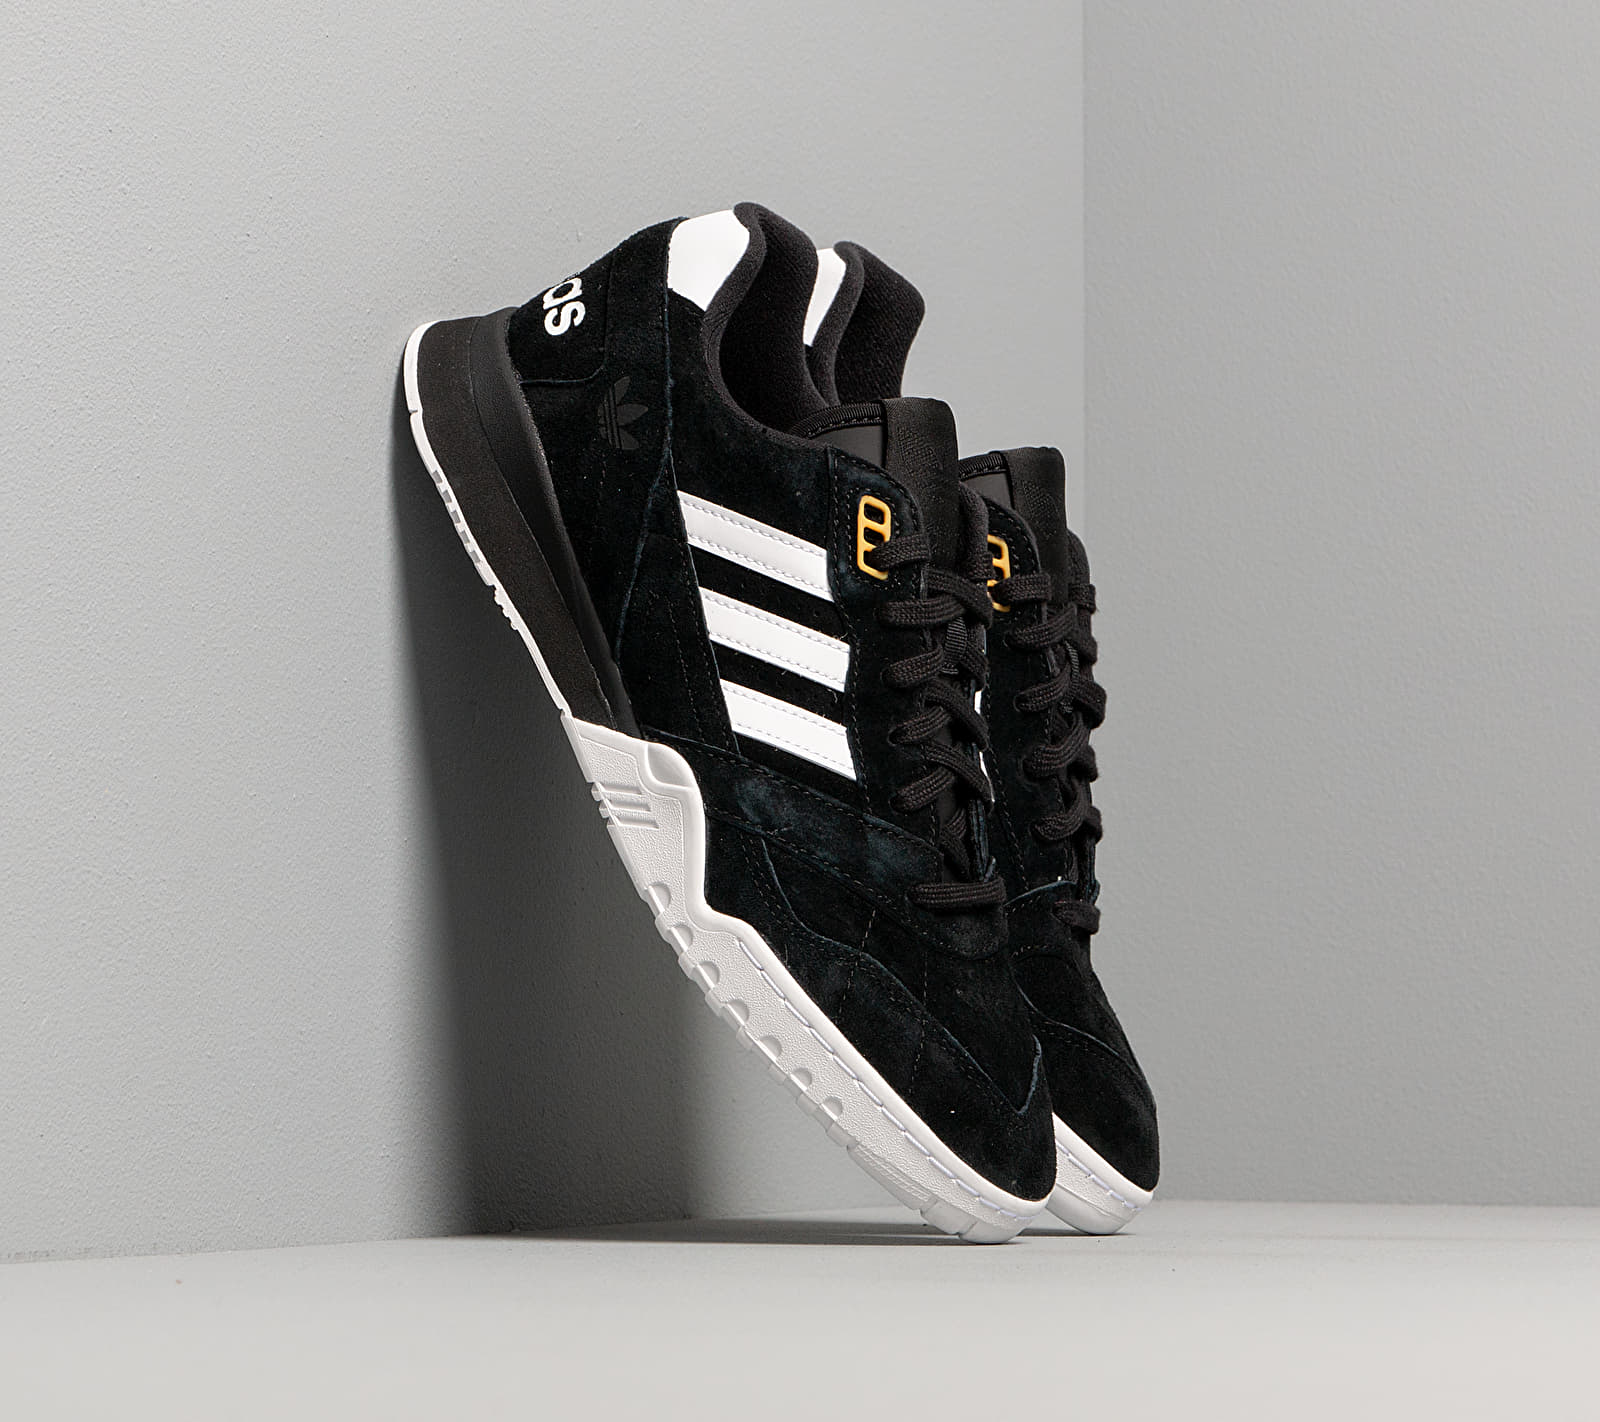 adidas A.R. Trainer Core Black/ Ftw White/ Active Gold